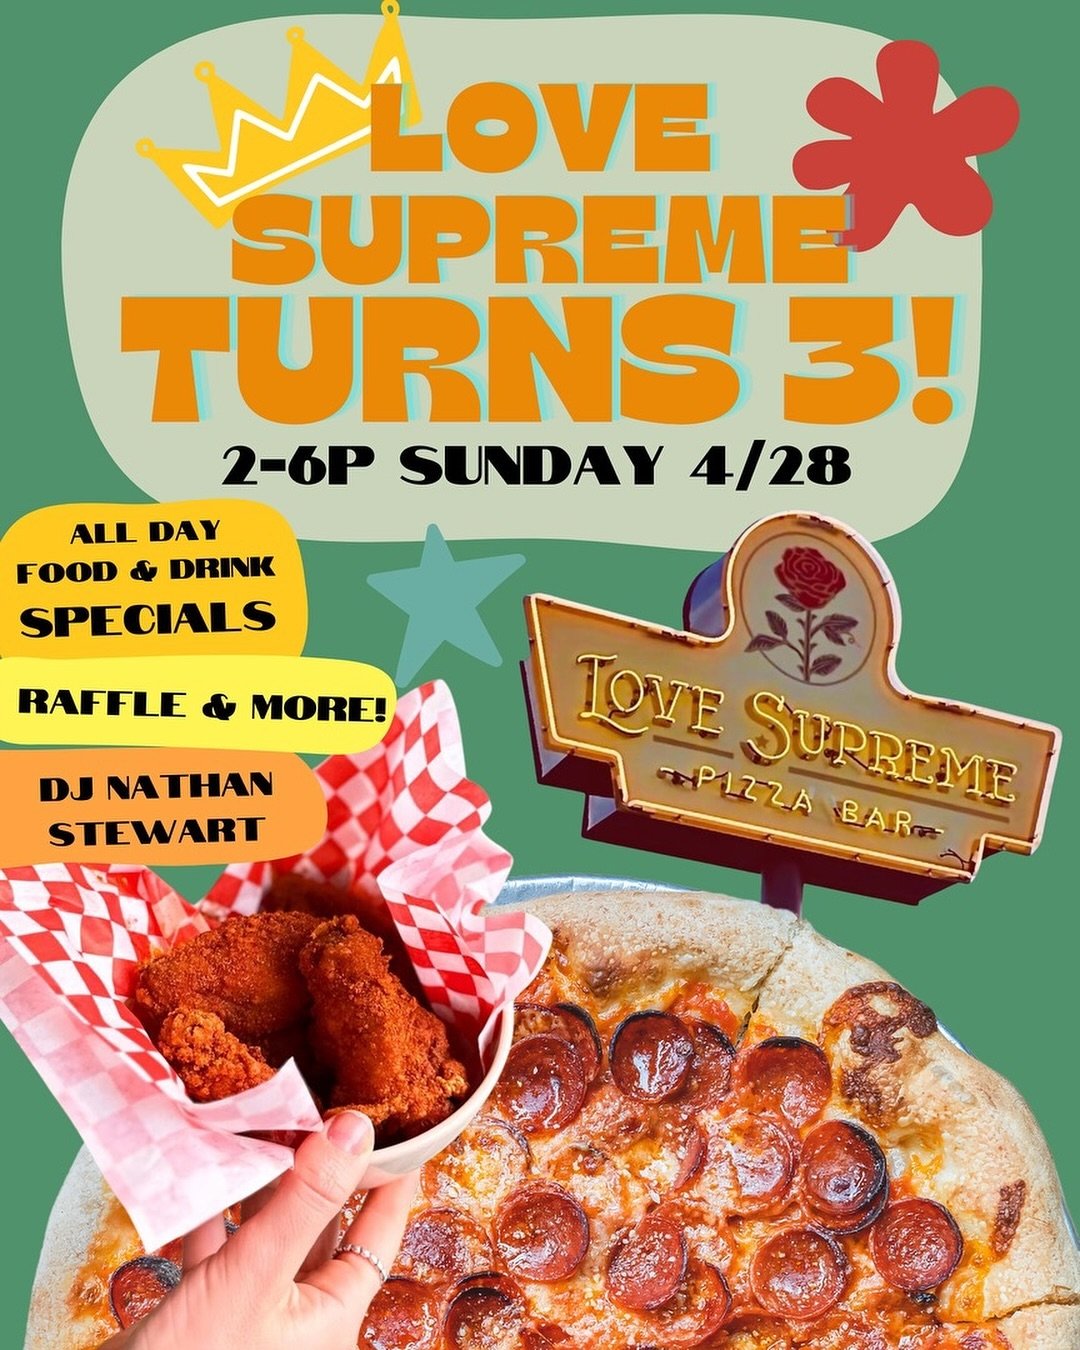 Join us as we toast to three amazing years at Love Supreme this April 28th, from 2pm to 6pm! We&rsquo;re cranking up the tunes with @djnathanstewart who will be on the decks, spinning the finest vinyl. Come hungry and thirsty, because we&rsquo;ve got